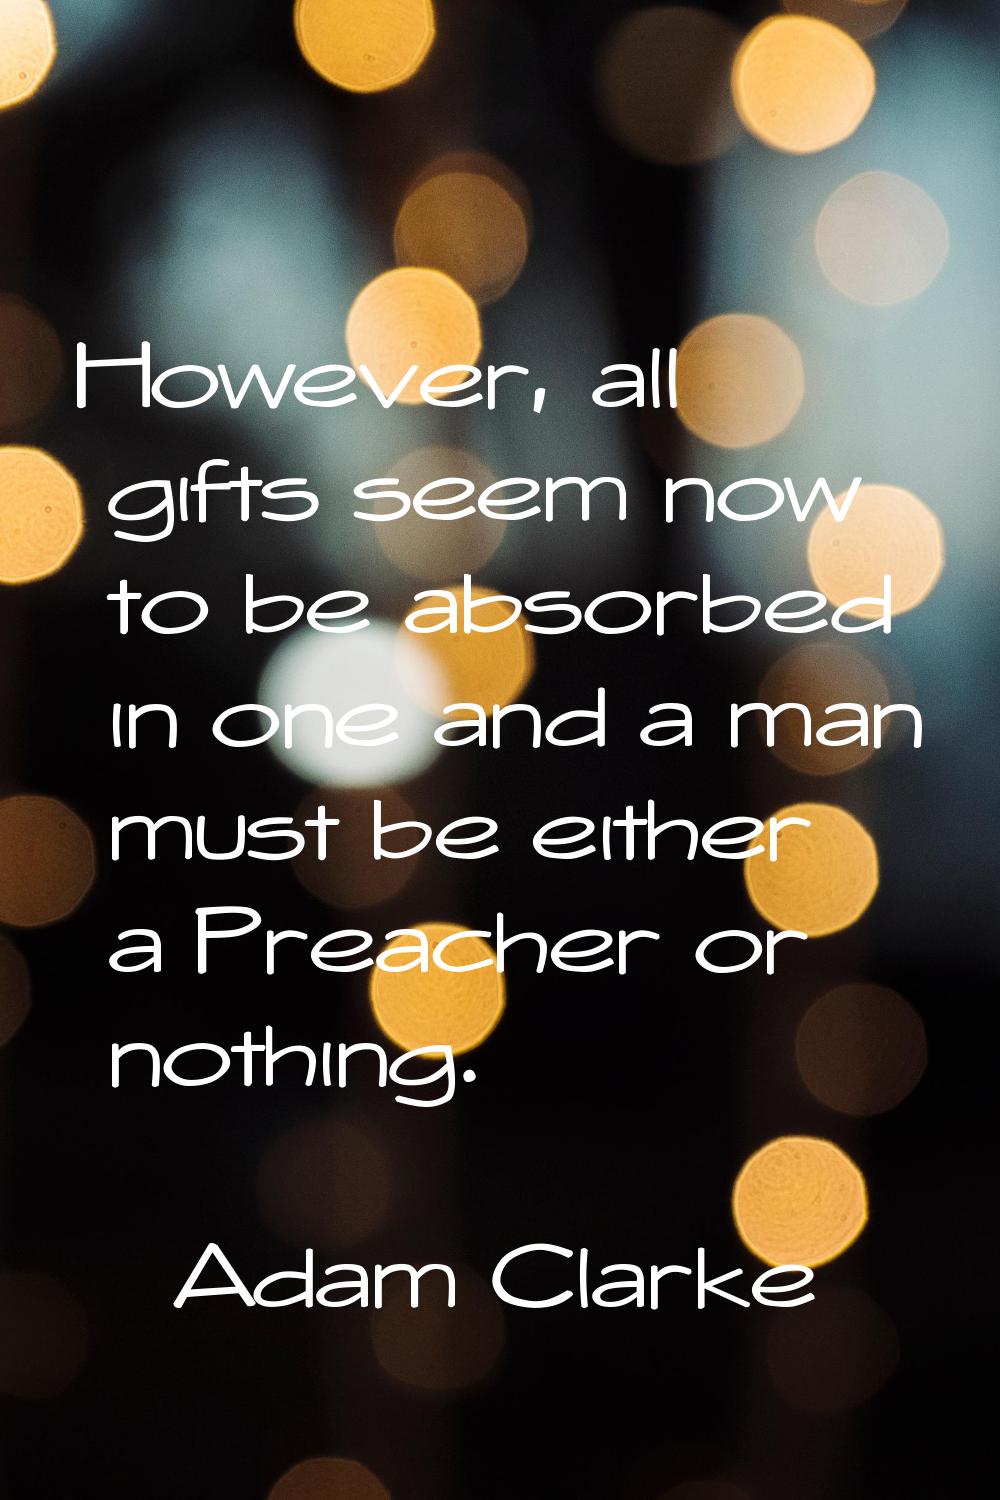 However, all gifts seem now to be absorbed in one and a man must be either a Preacher or nothing.